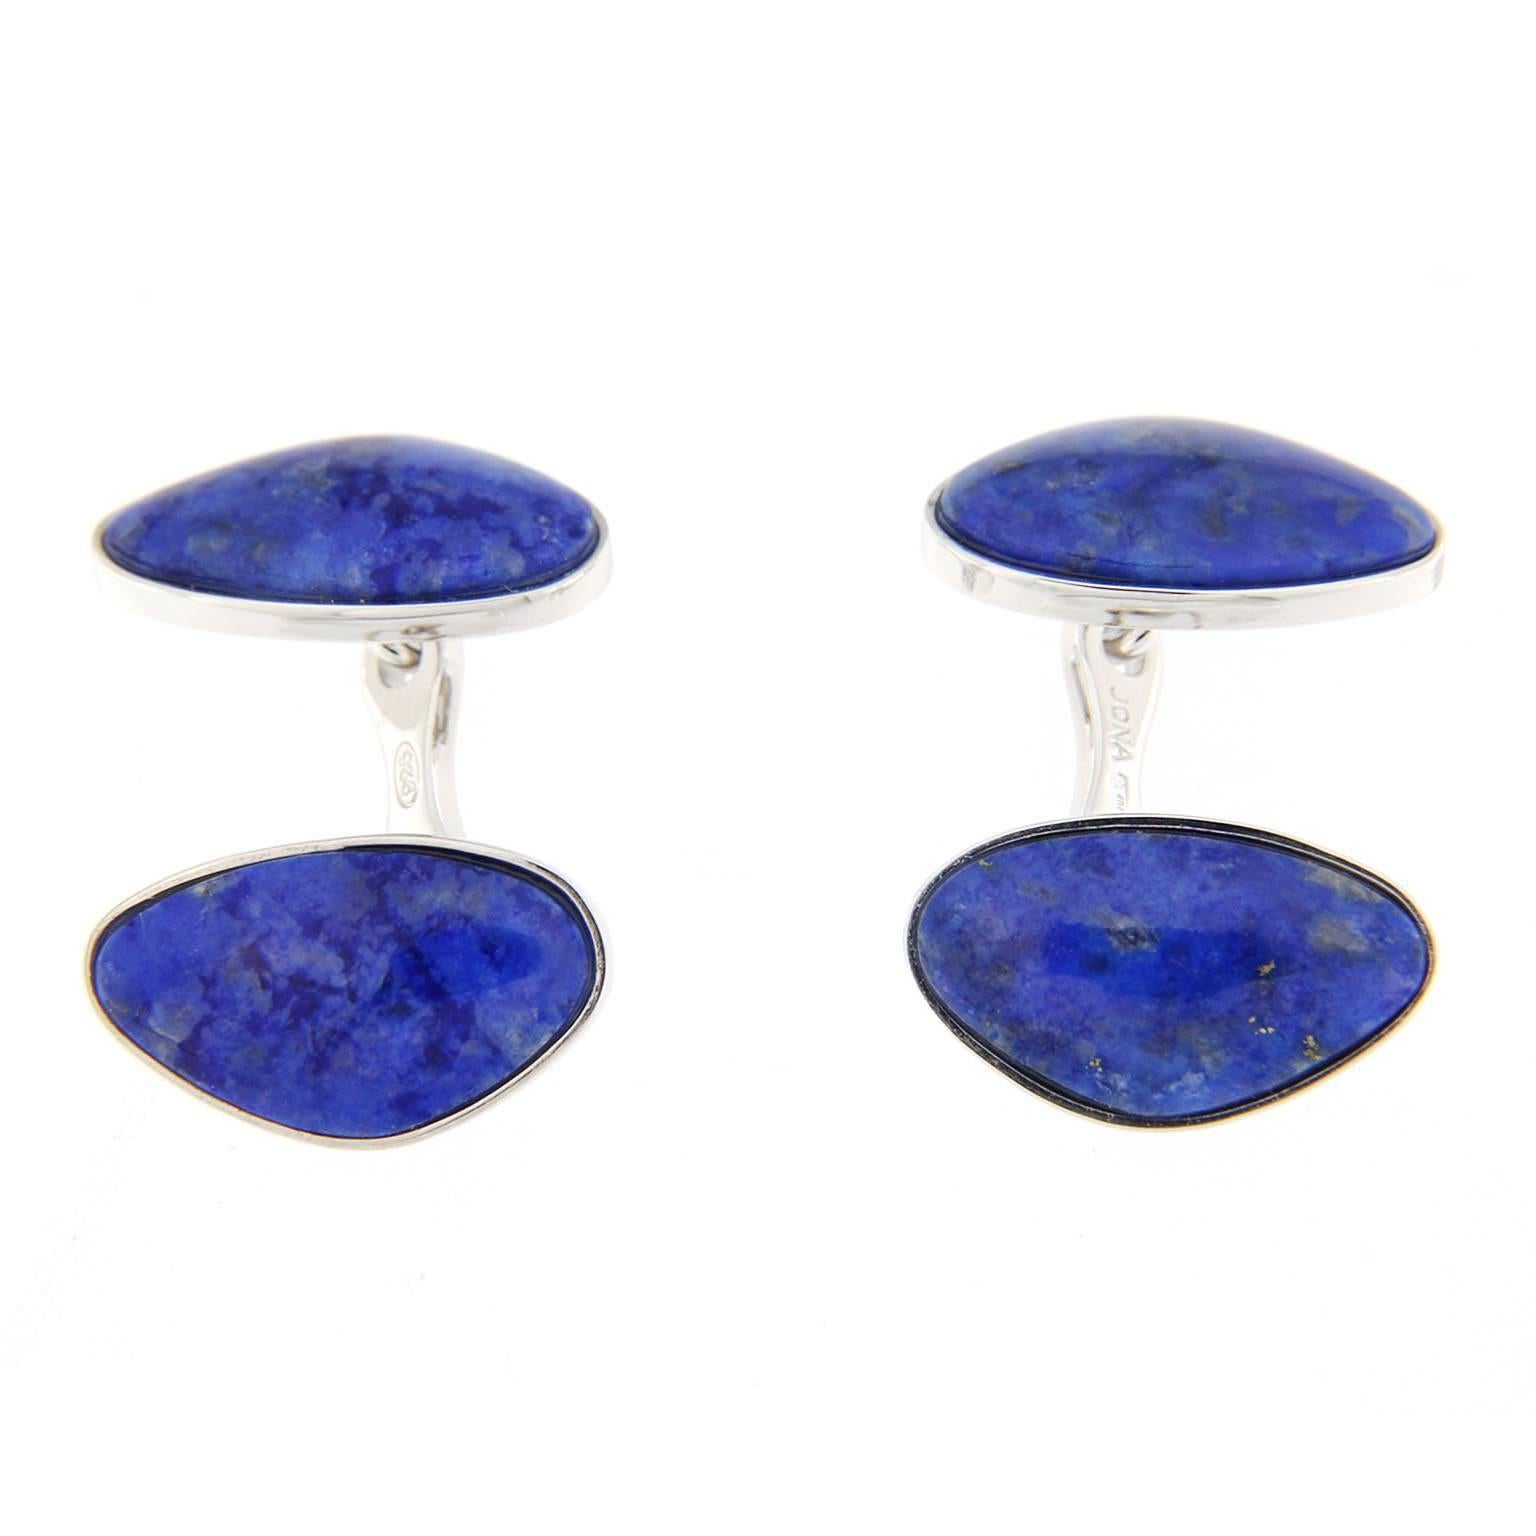 Alex Jona design collection lapis lazuli pebble cufflinks mounted in 925/°°° sterling silver Rhodium Plate. Marked JONA 925.

Alex Jona cufflinks stand out, not only for their special design and for the excellent quality, but also for the careful